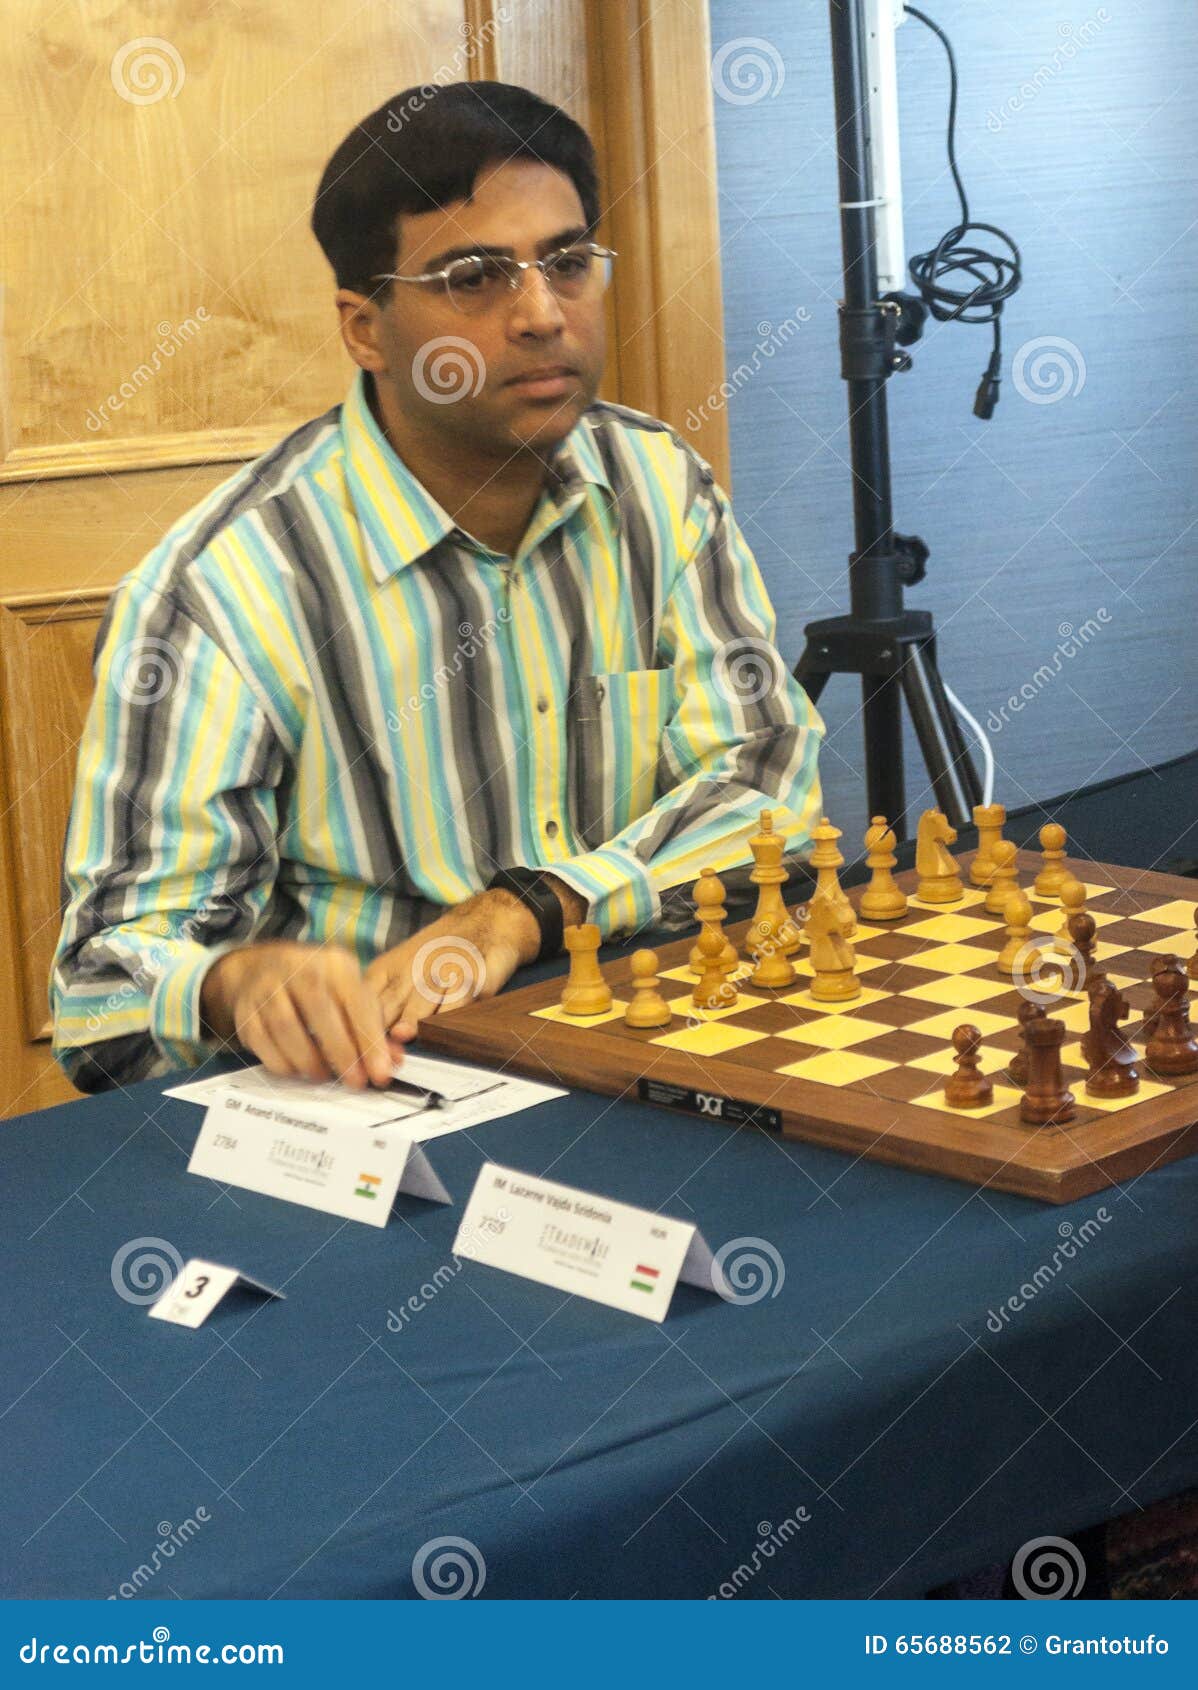 Viswanathan Anand on Instagram